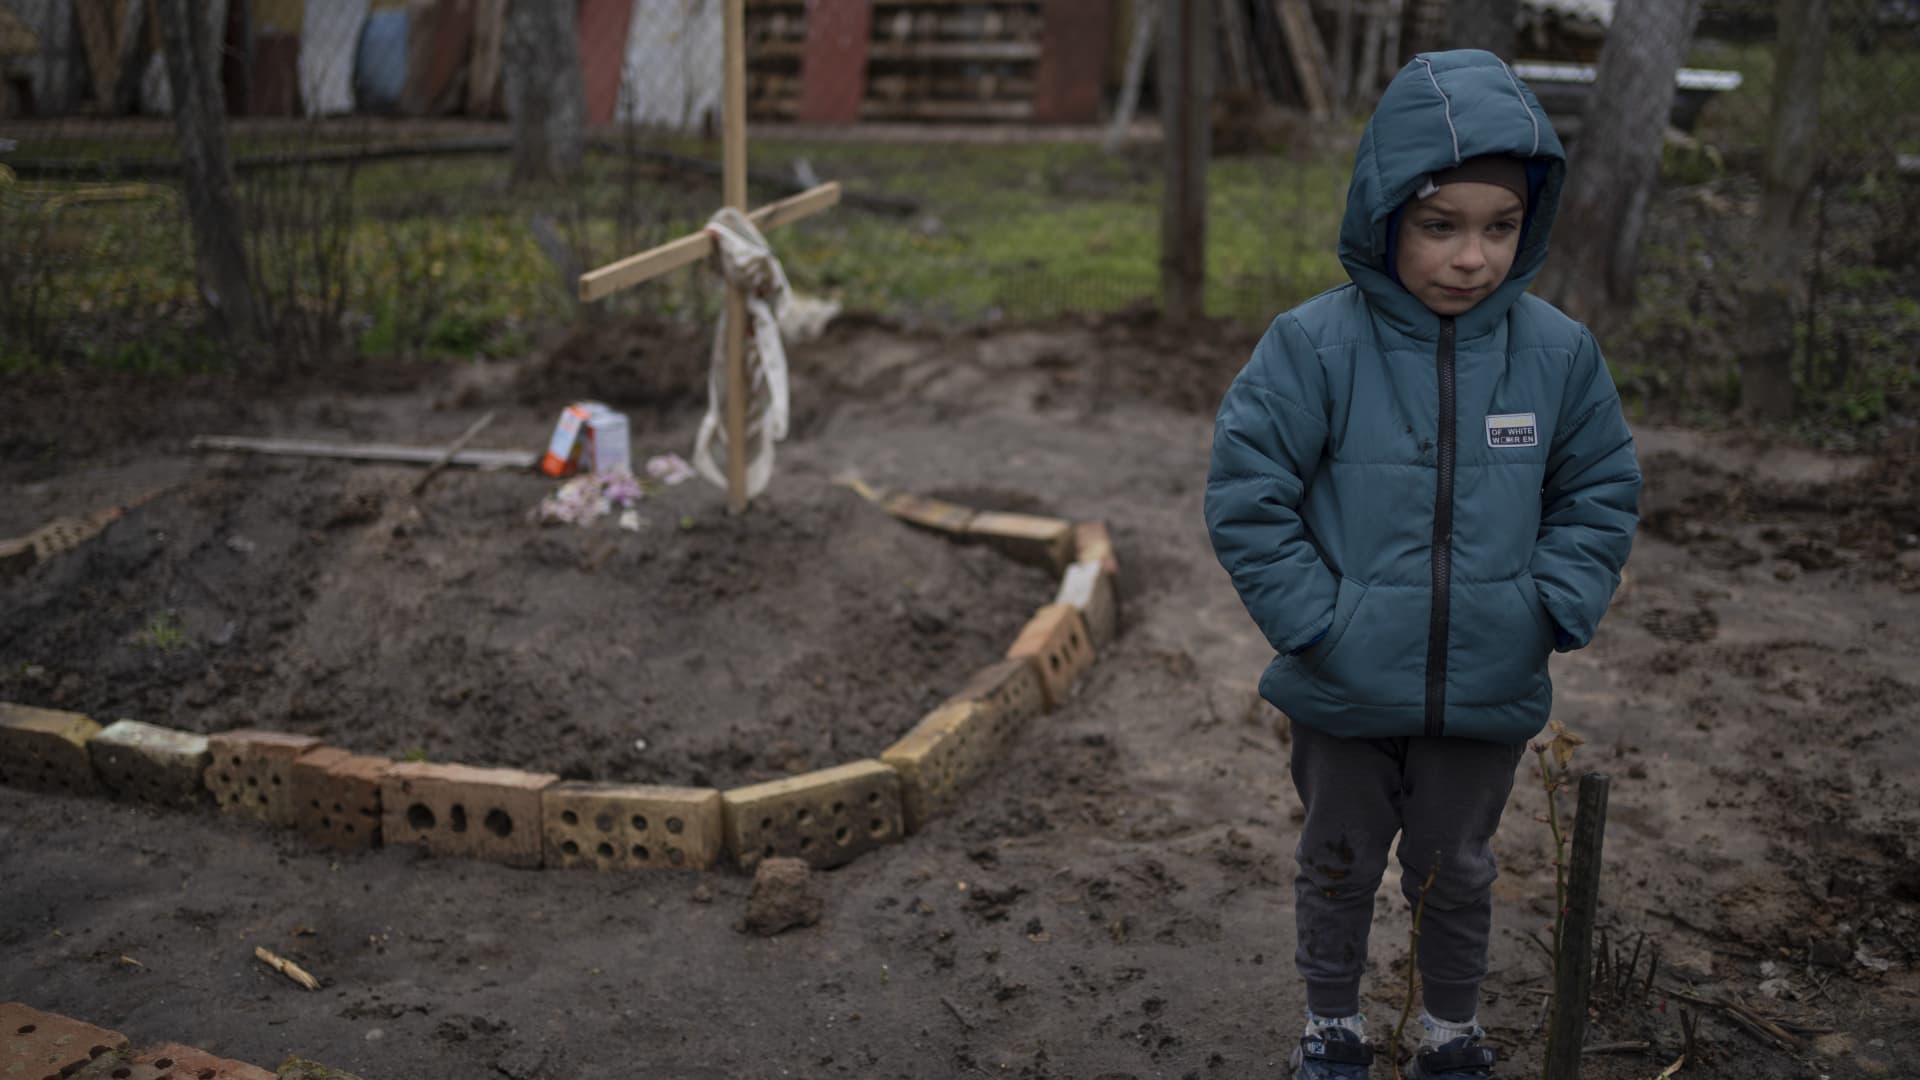 In the courtyard of their house, Vlad Tanyuk, 6, stands near the grave of his mother Ira Tanyuk, who died because of starvation and stress due to the war, on the outskirts of Kyiv, Ukraine, Monday, April 4, 2022.